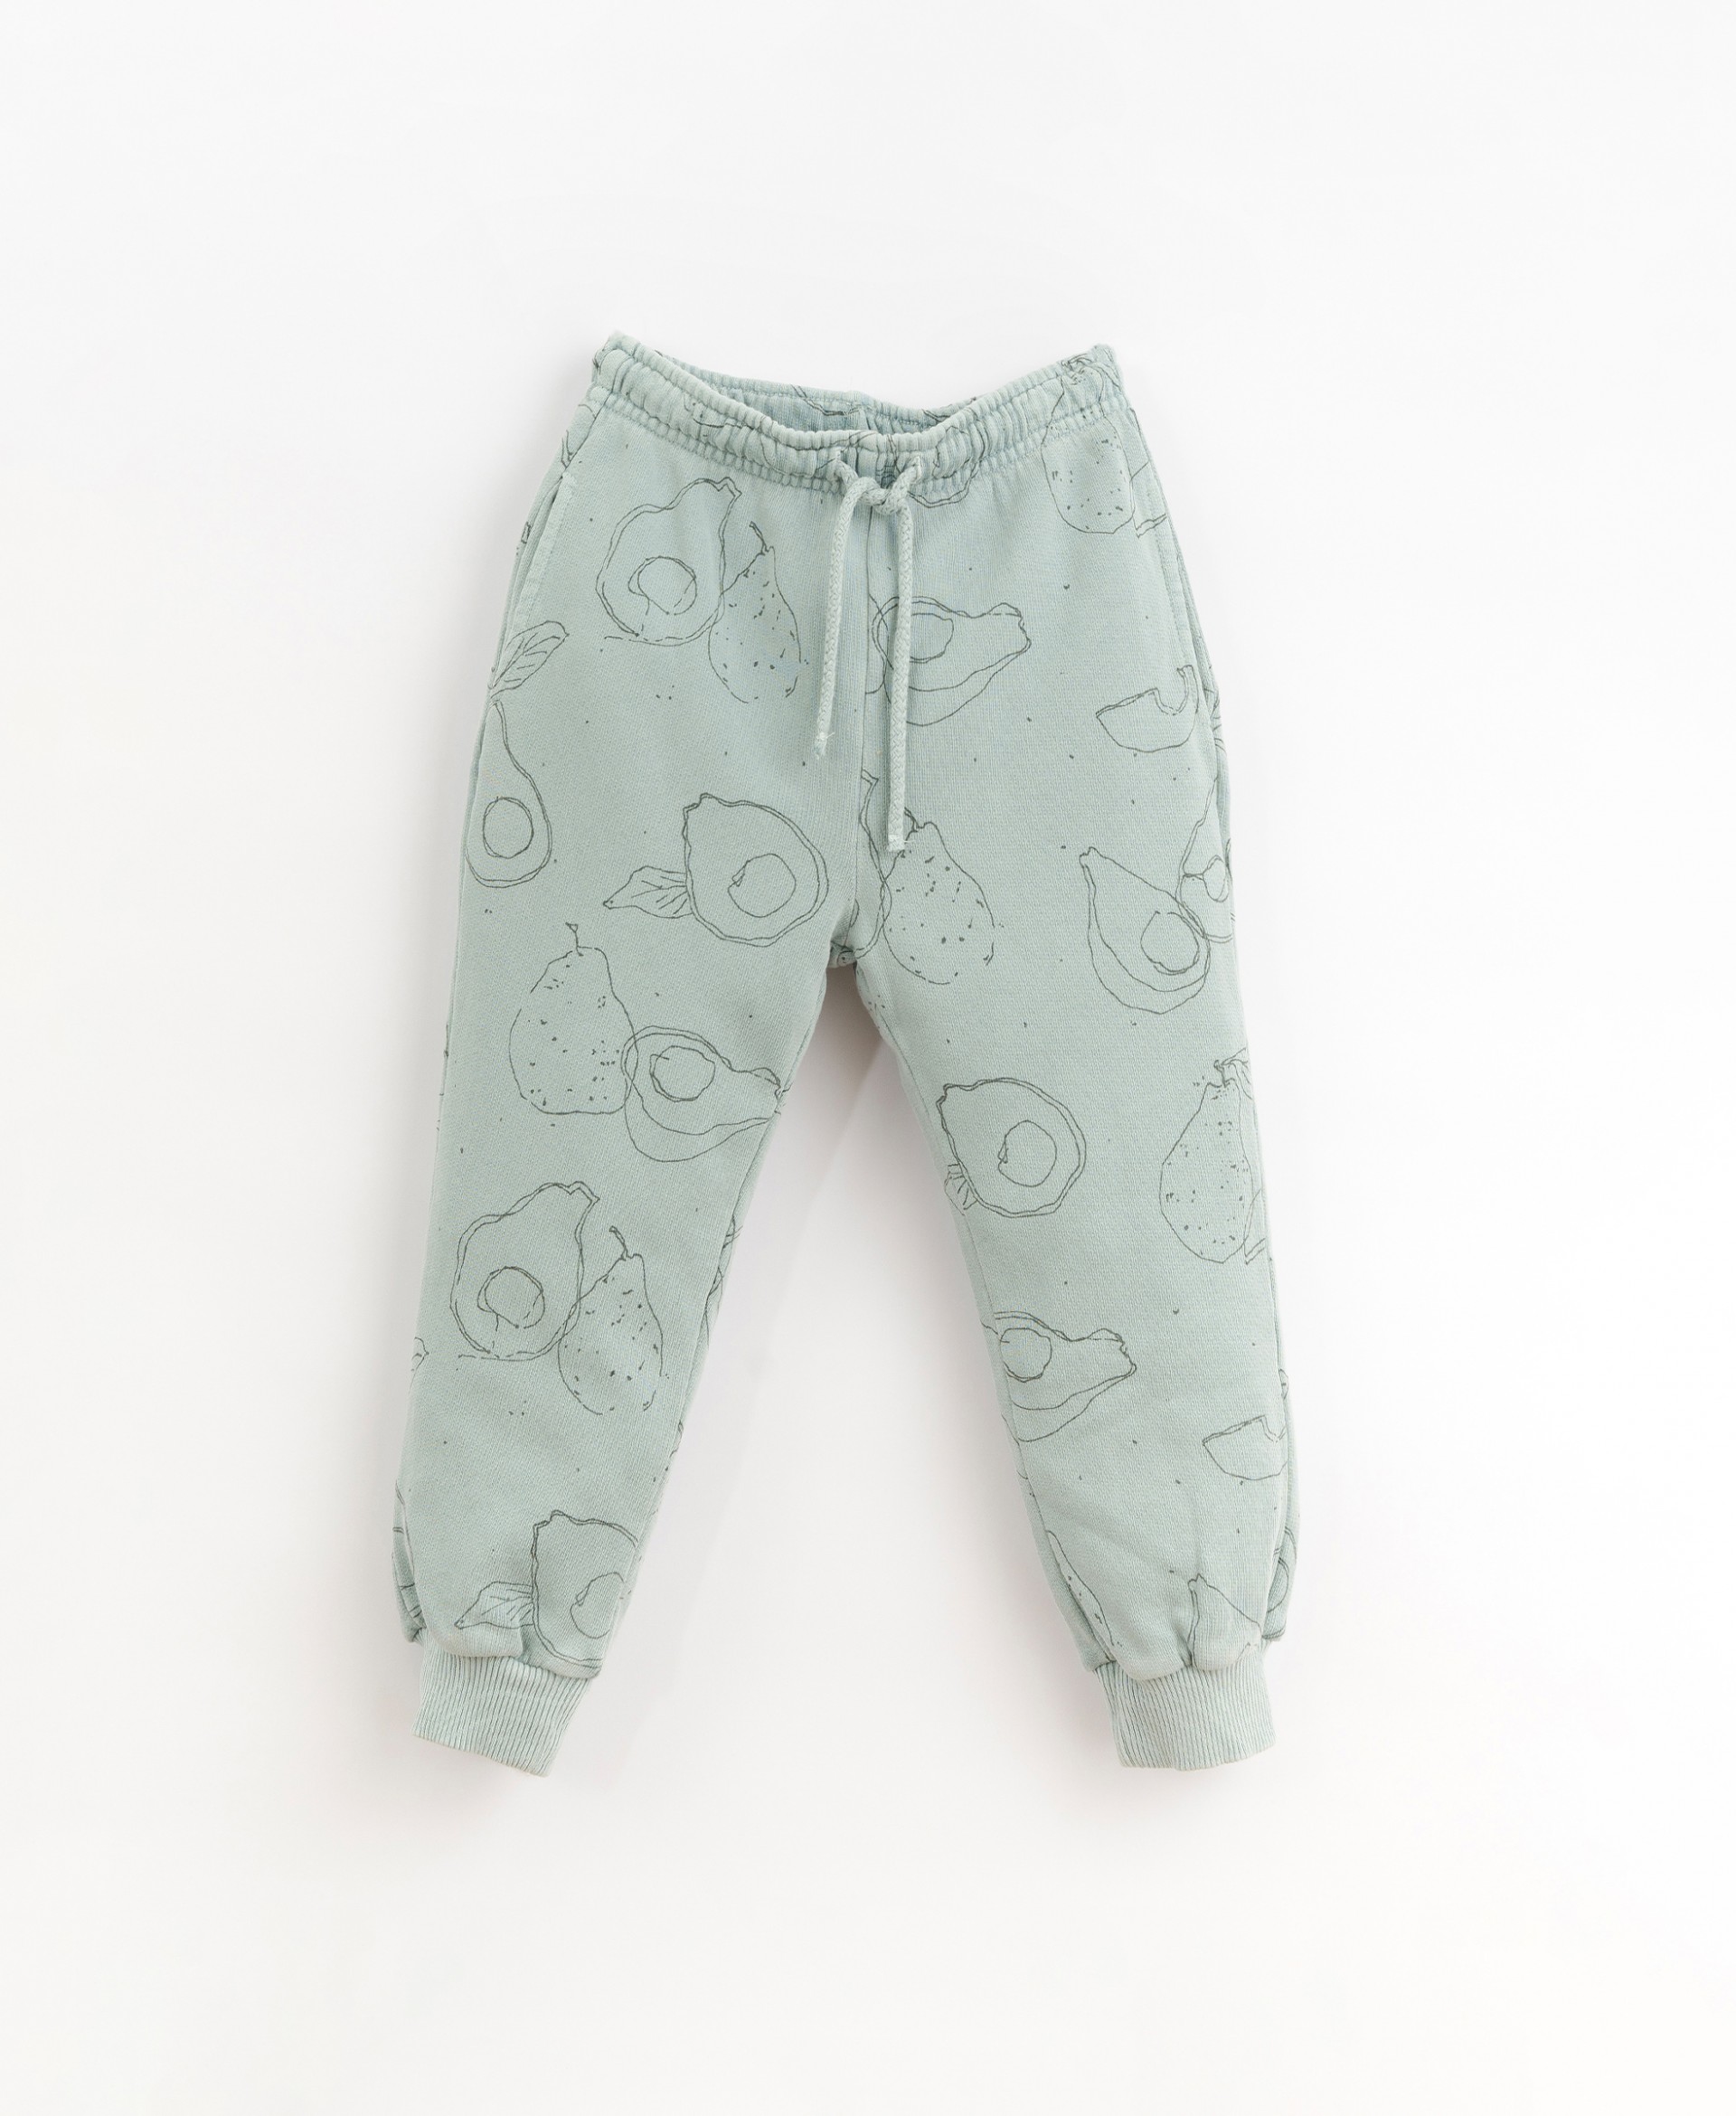 Trousers with avocado illustration | Organic Care